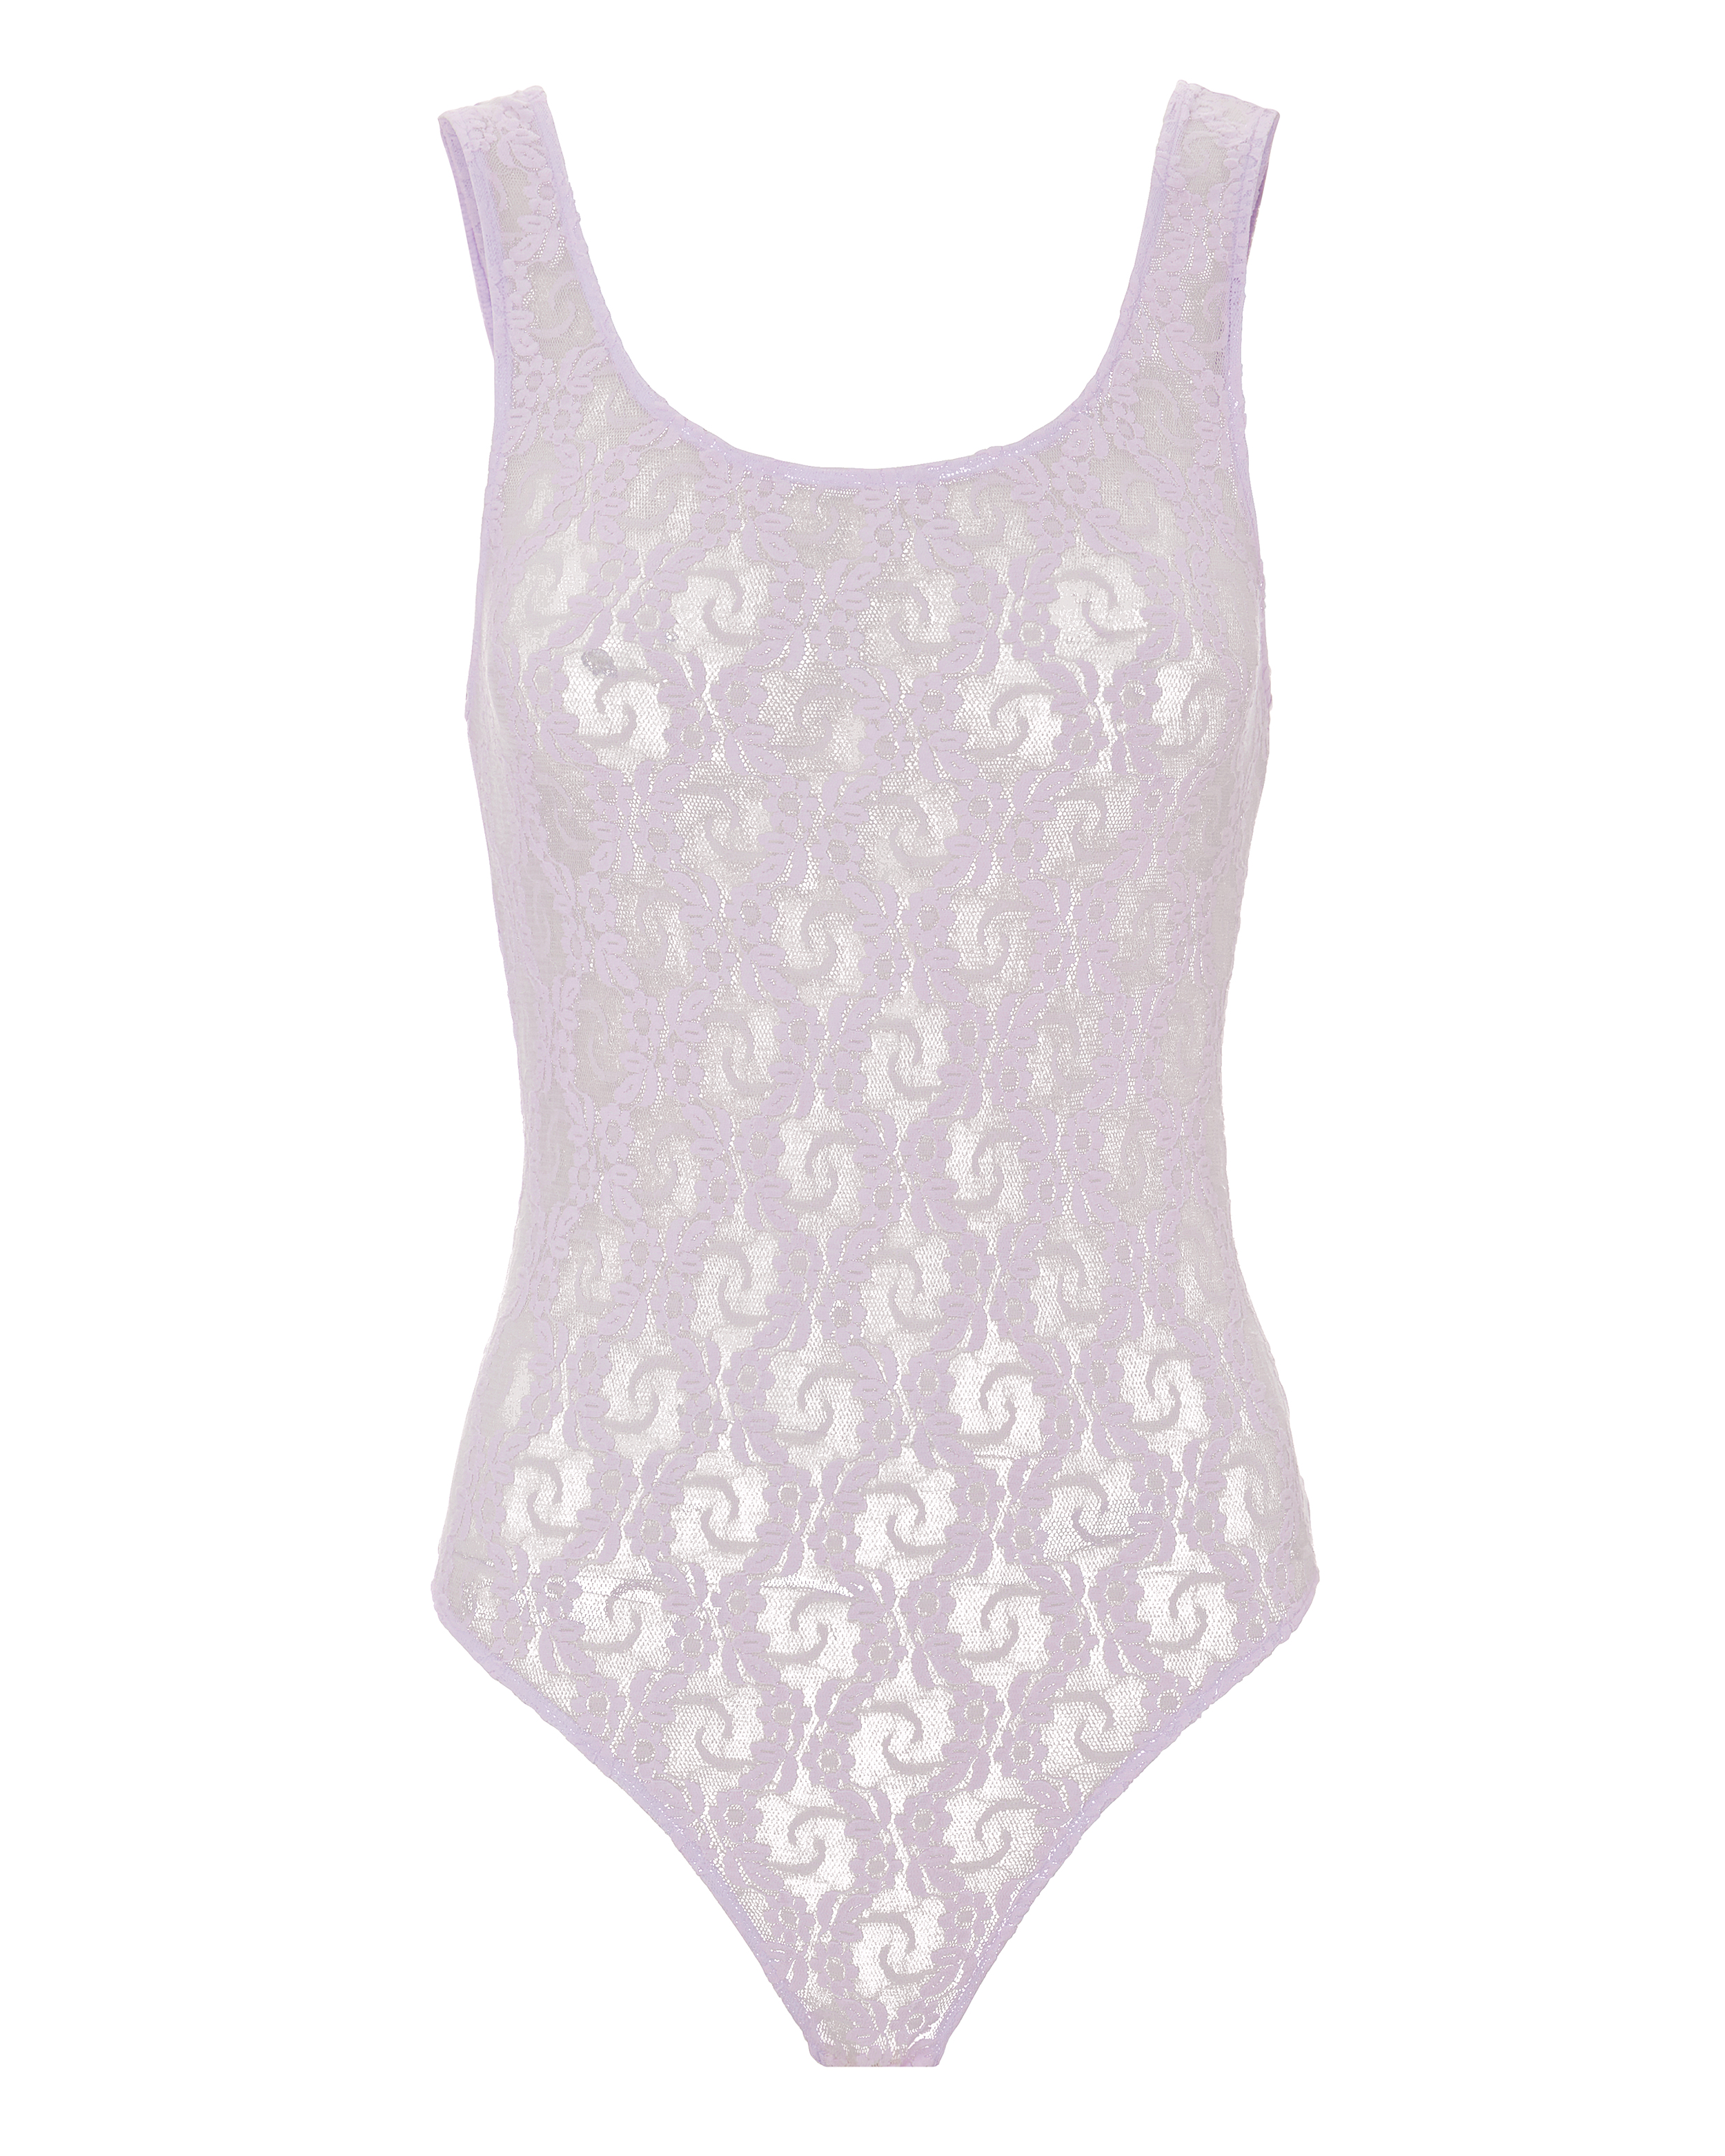 ONLY HEARTS Lilac Lace Bodysuit,8661